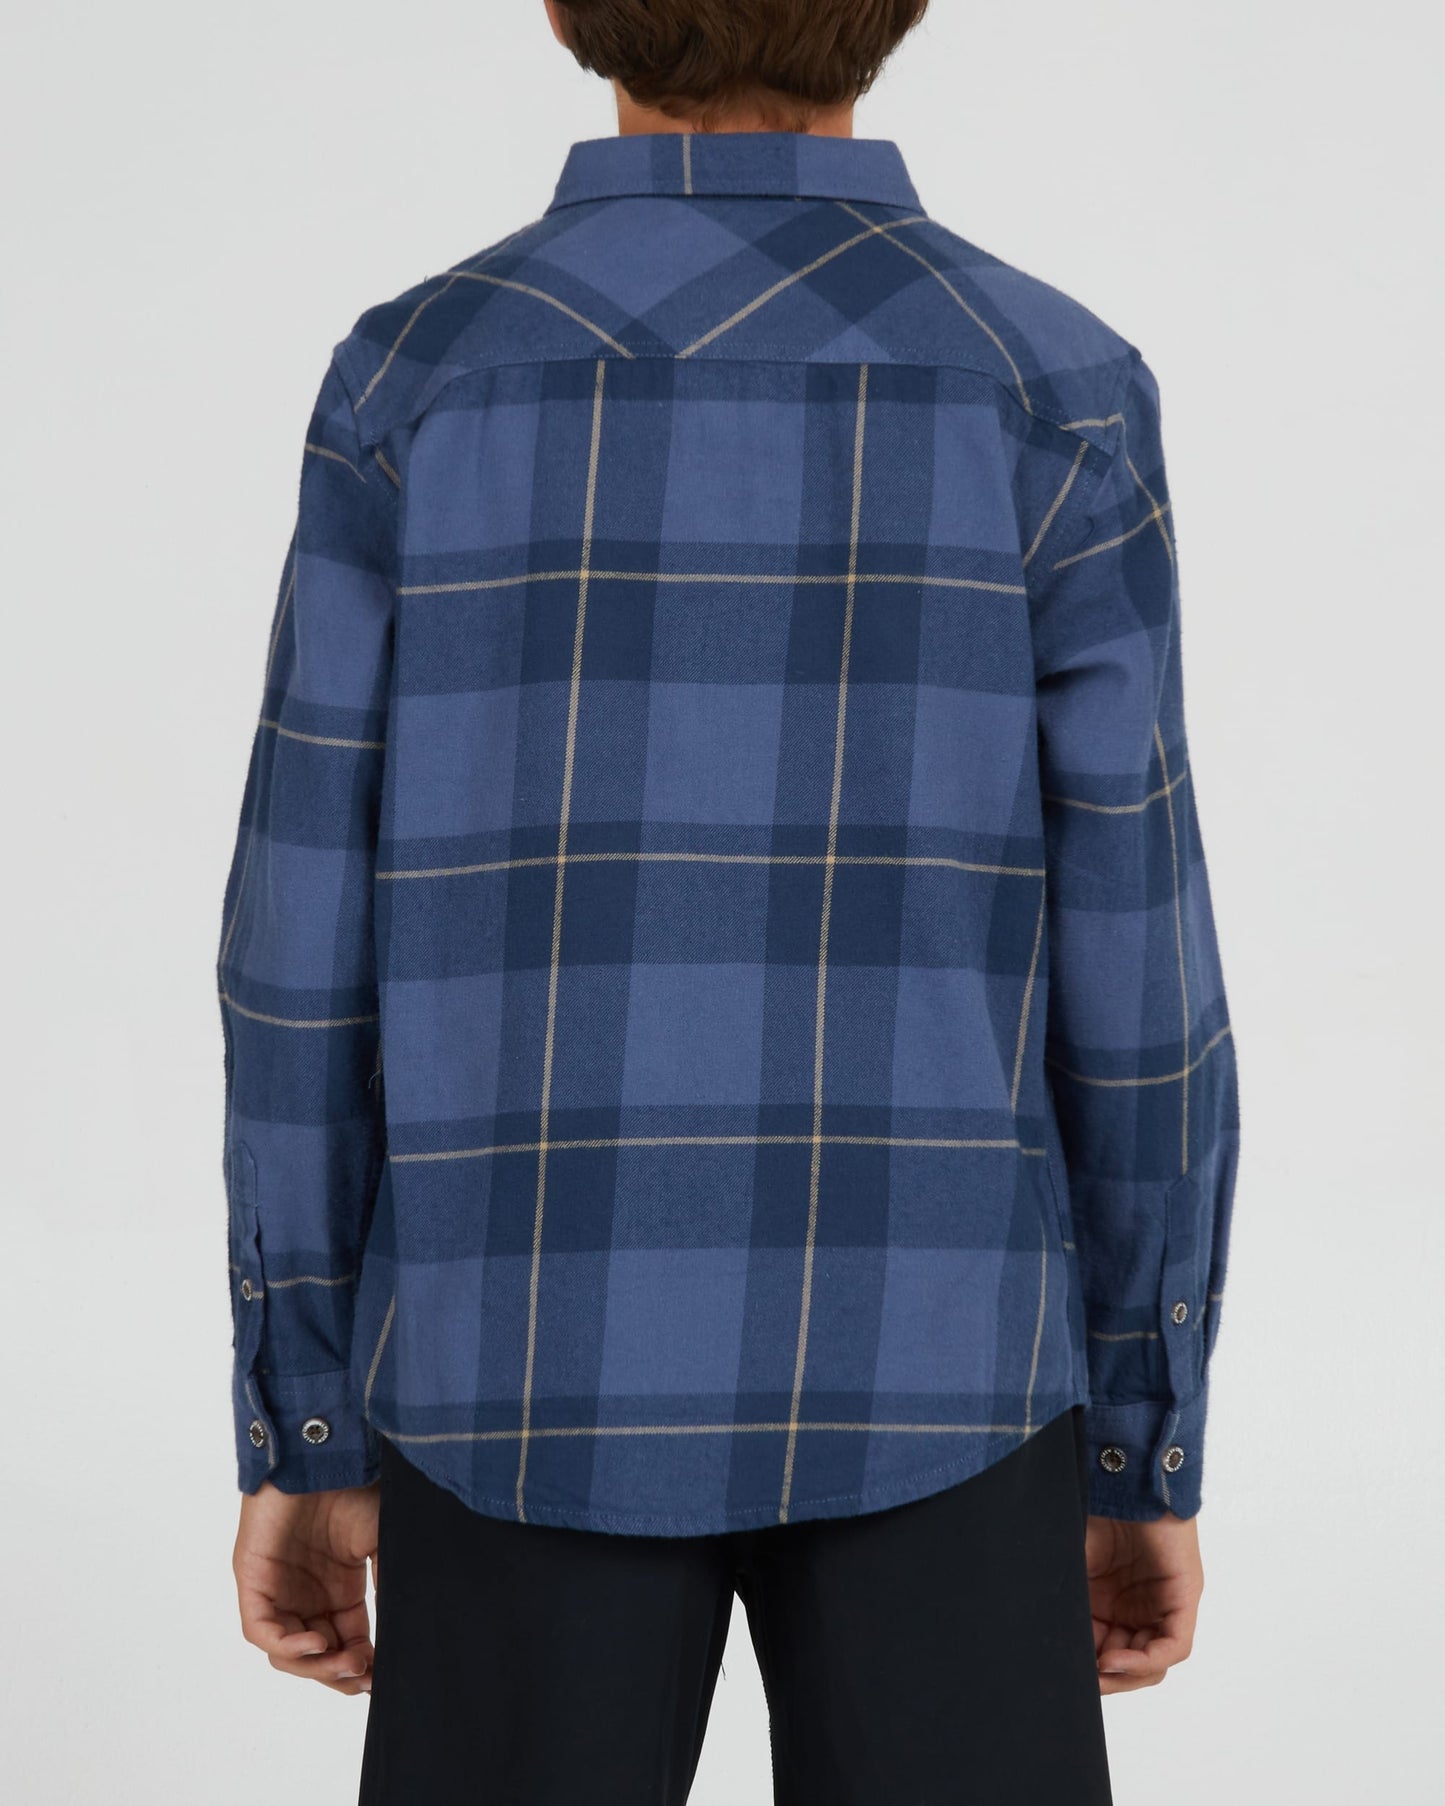 Salty crew WOVEN SHIRTS FIRST LIGHT BOYS L/S FLANNEL - NAVY/BLUE in NAVY/BLUE